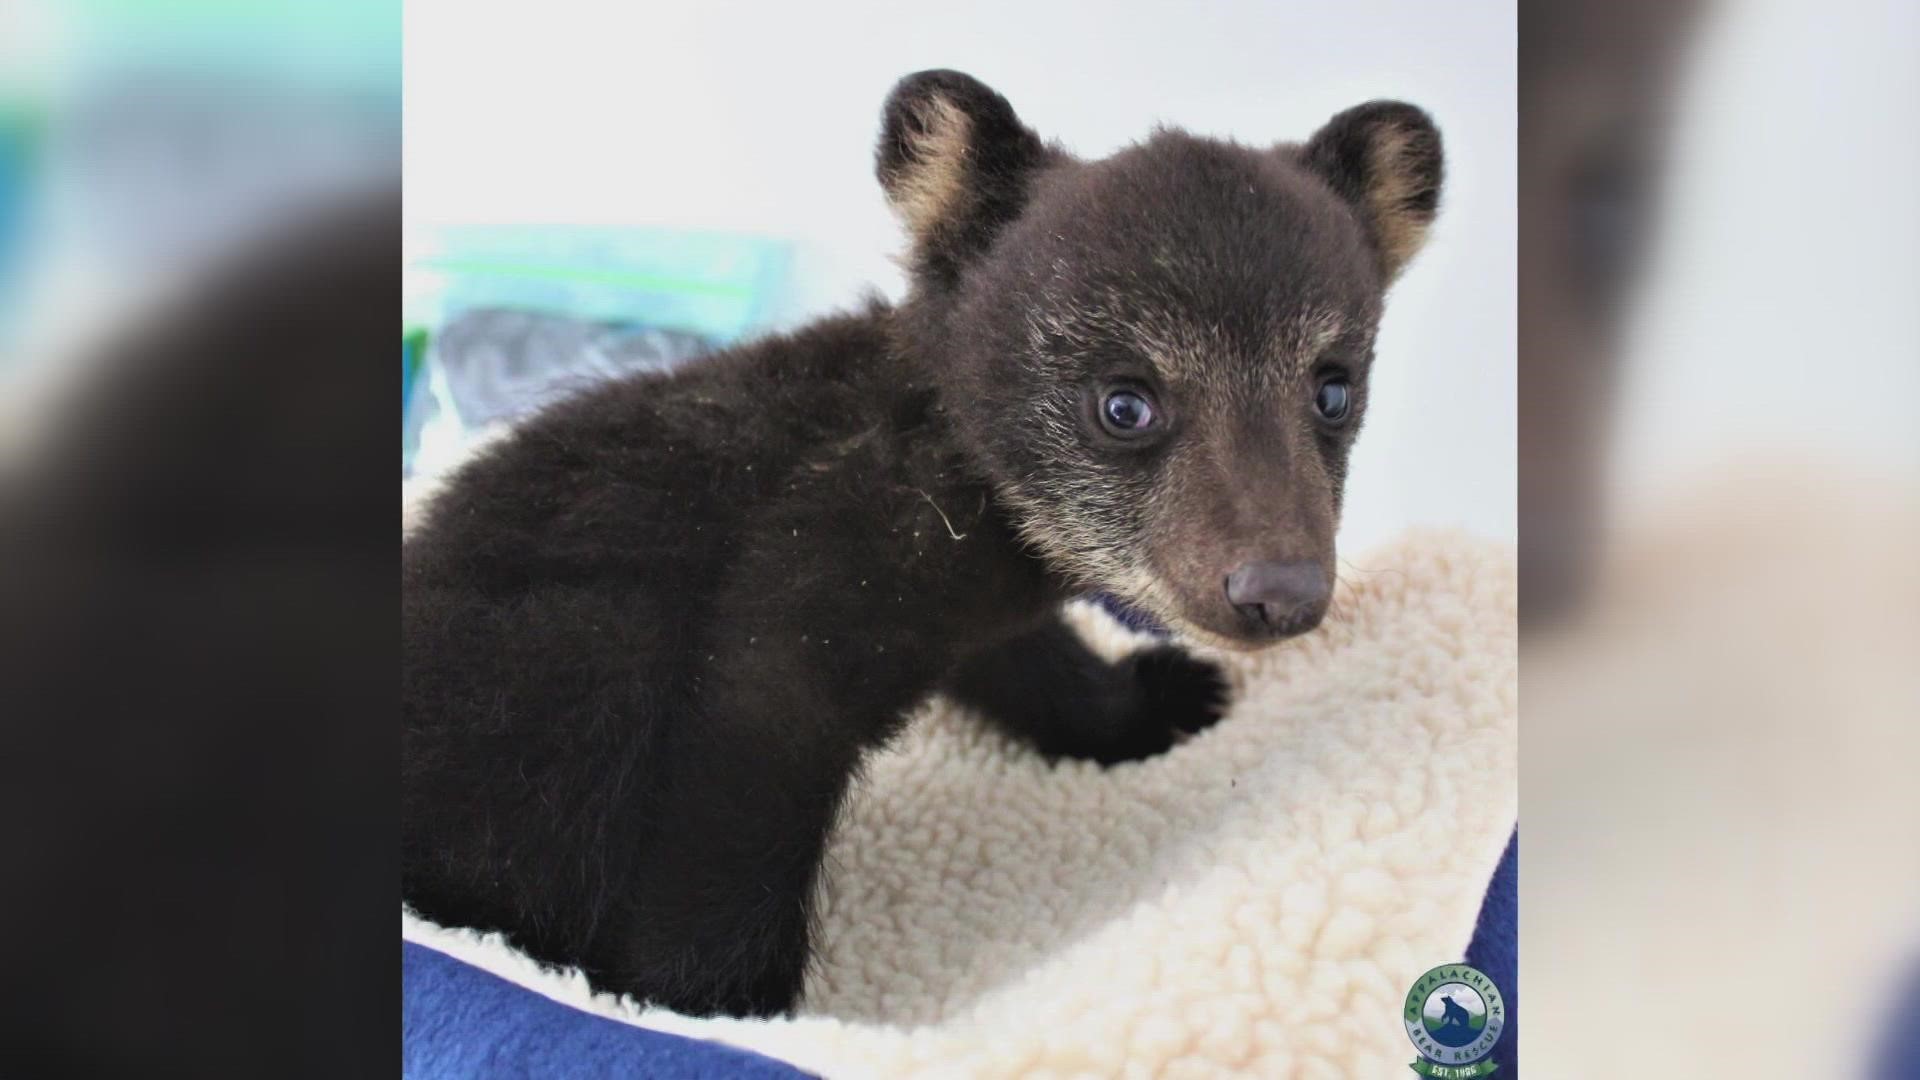 Taco arrived at the Appalachian Bear Rescue facility on May 5, 2022, and only weighed around 3.6 pounds.